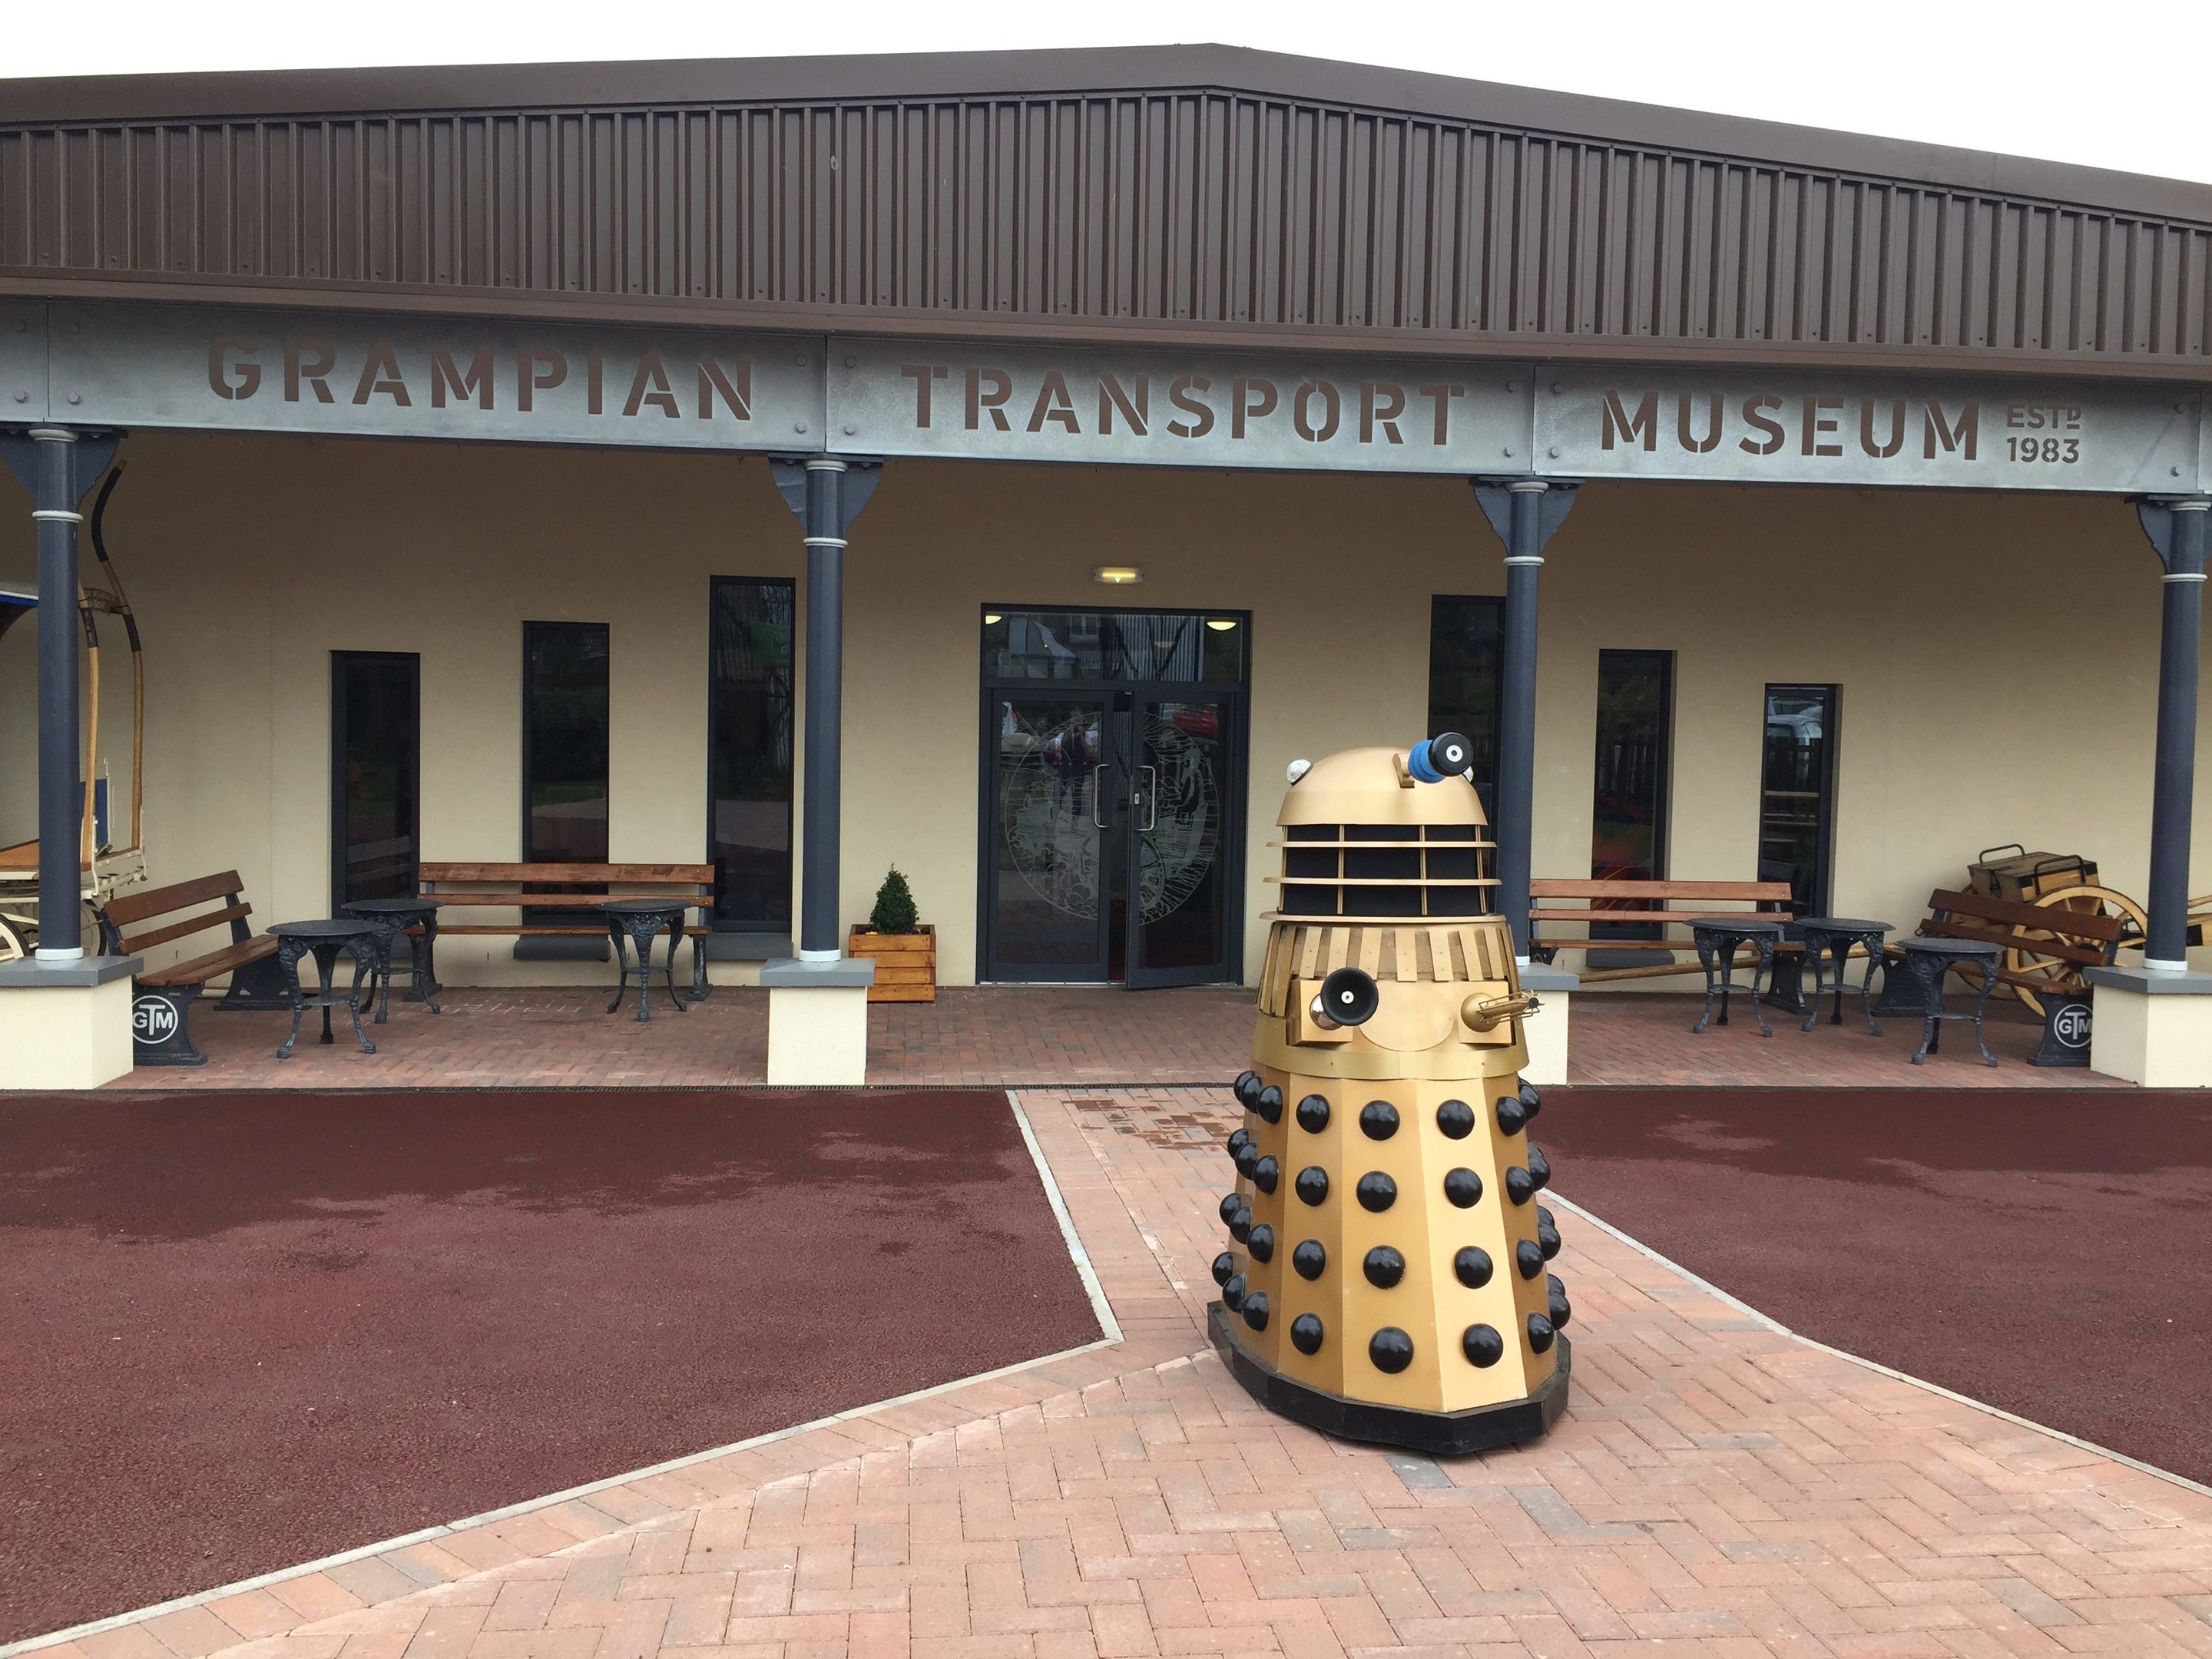 Alec the Dalek waits for intruders outside the Grampian Transport Museum, Alford.